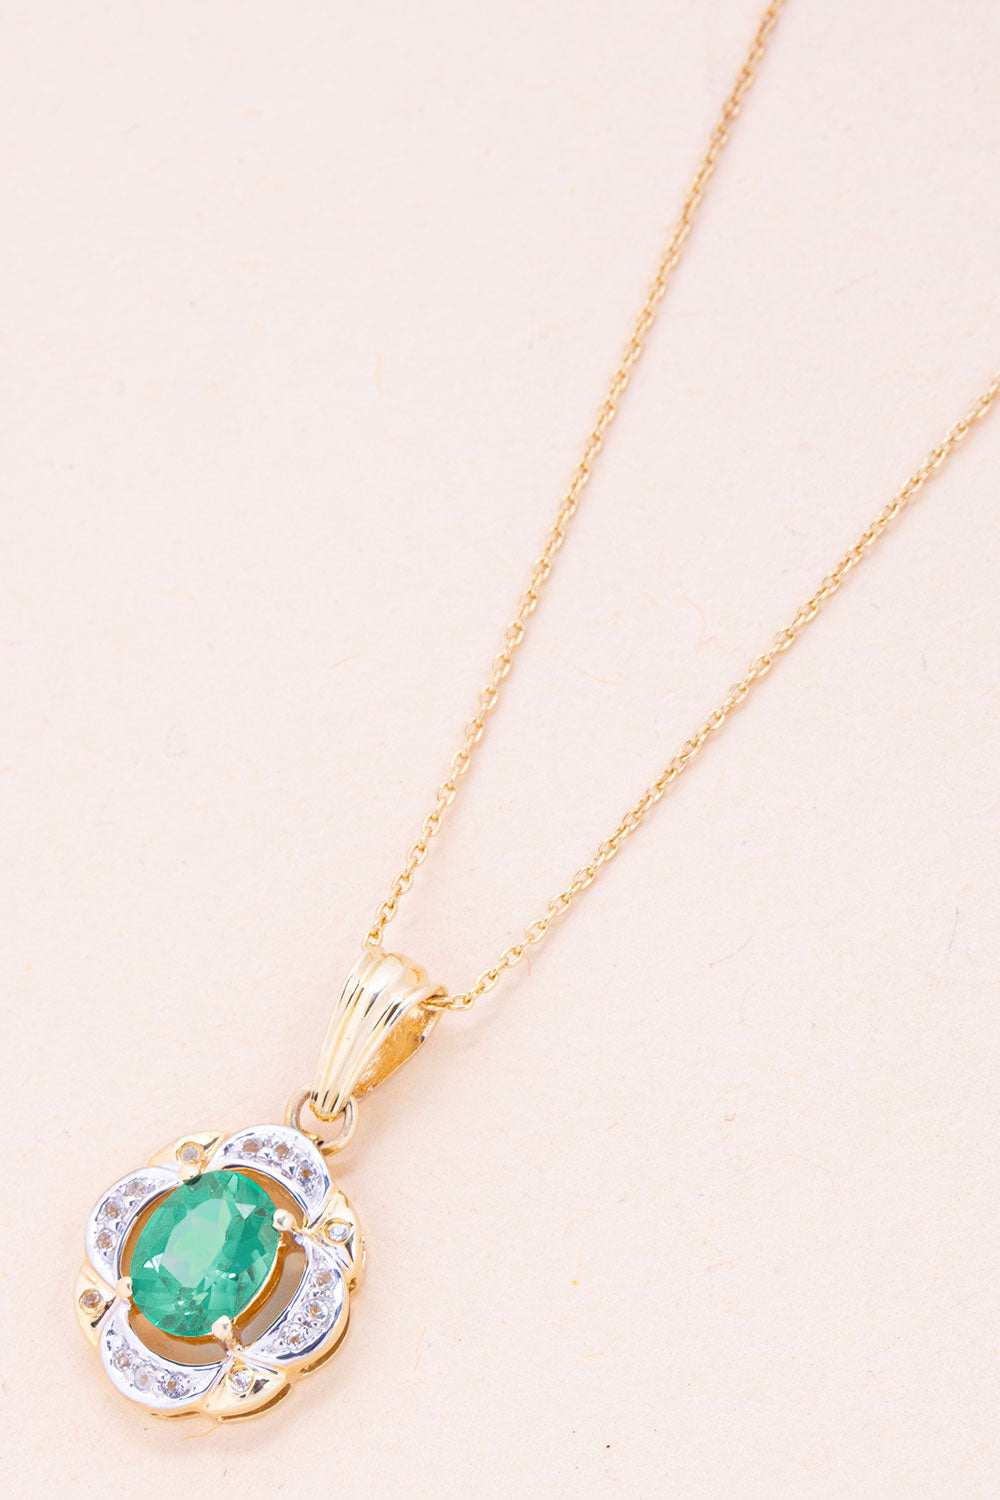 Emerald And White Topaz Necklace Pendant with Chain